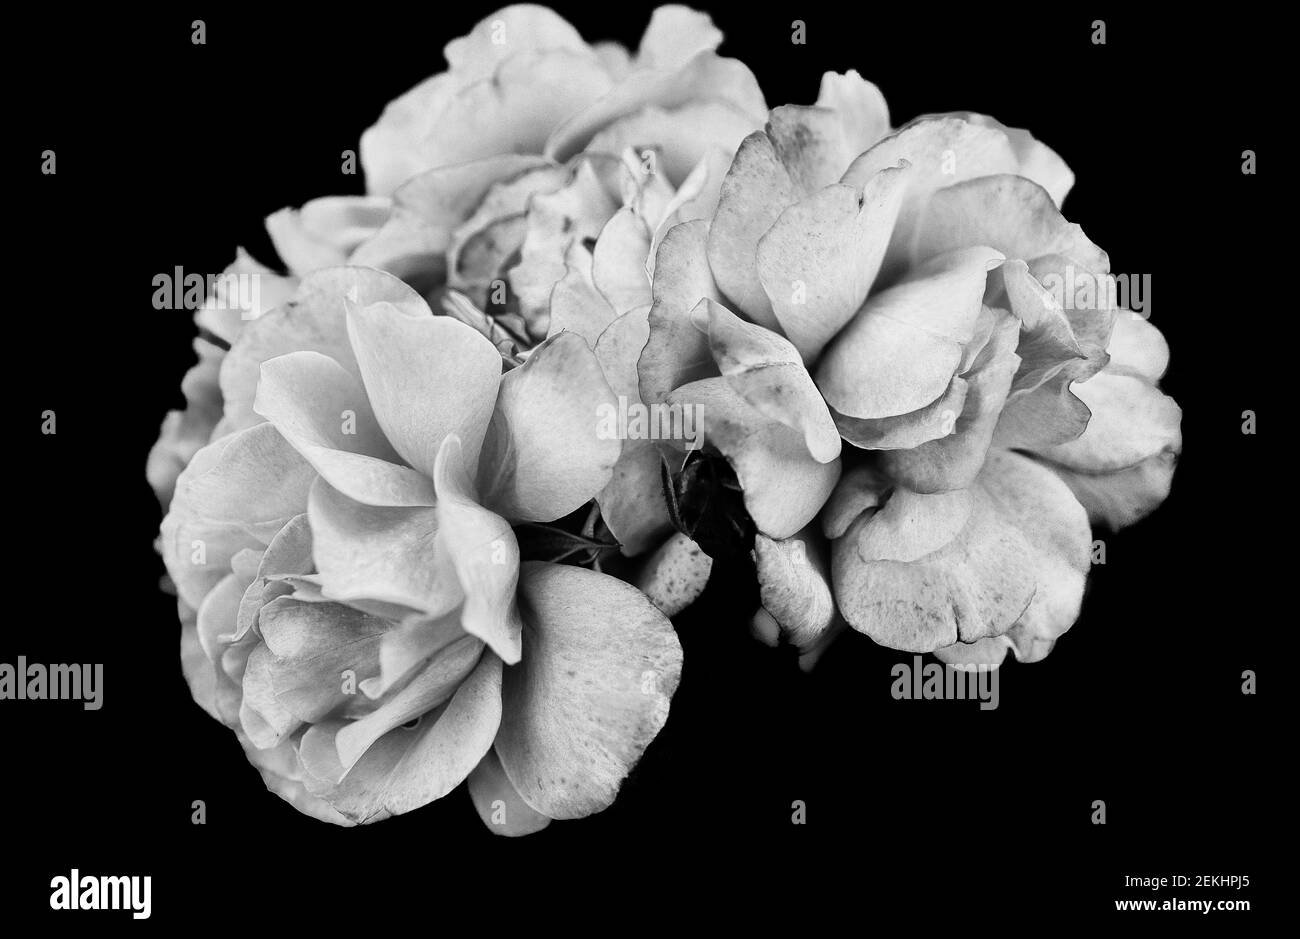 Close-up of black and white group of roses against black background ...